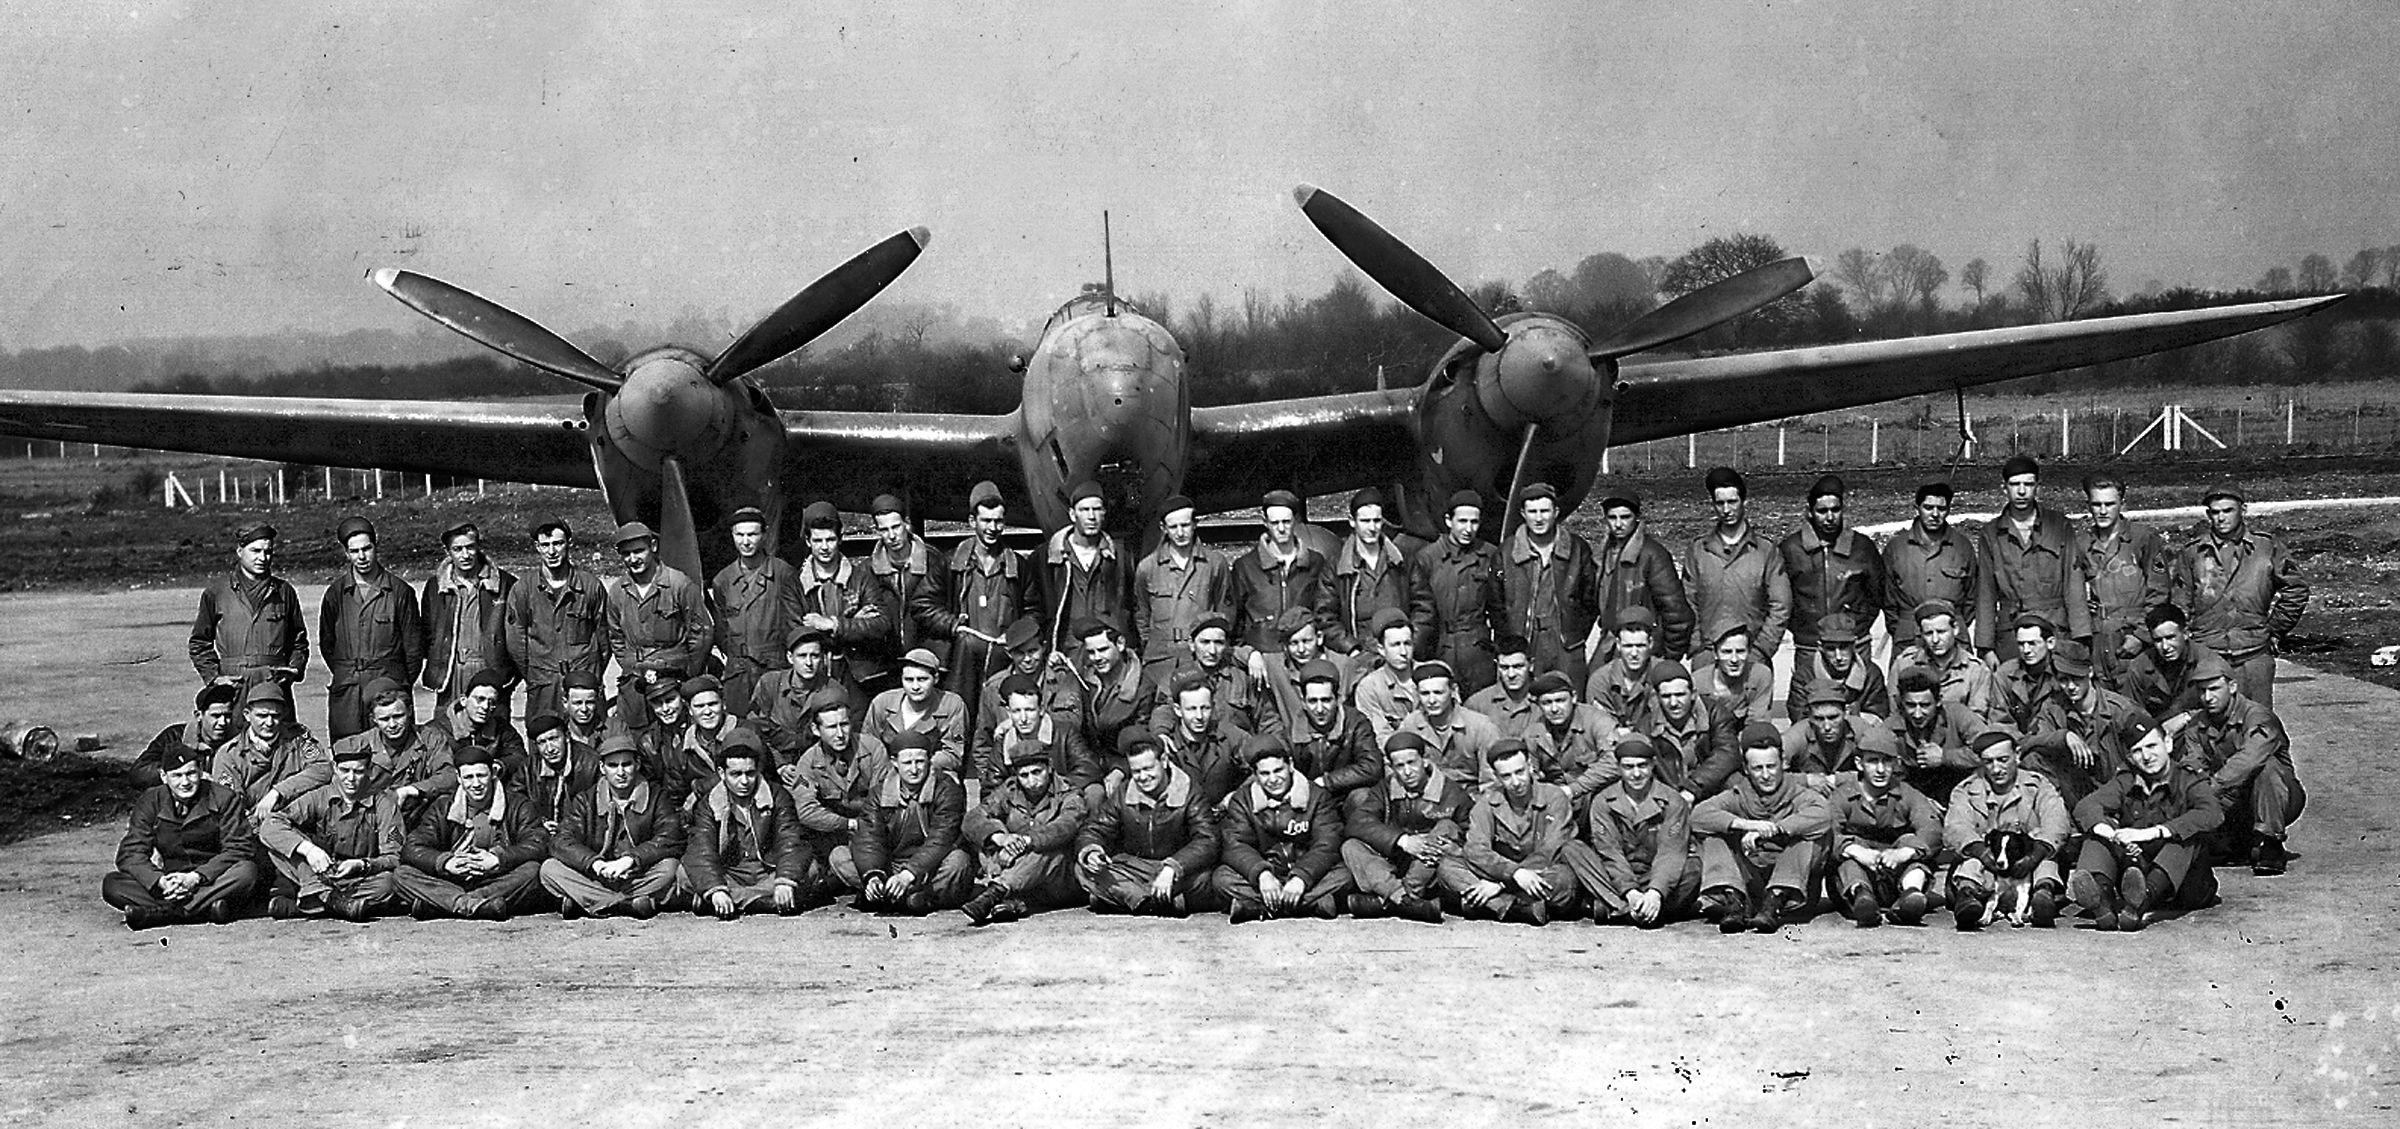 The aircraft mechanics and technicians of the 30th Squadron, 67th Tactical Reconnaissance Group, Ninth Air Force, photographed at their English base in Chalgrove, Oxfordshire, April 8, 1944. 